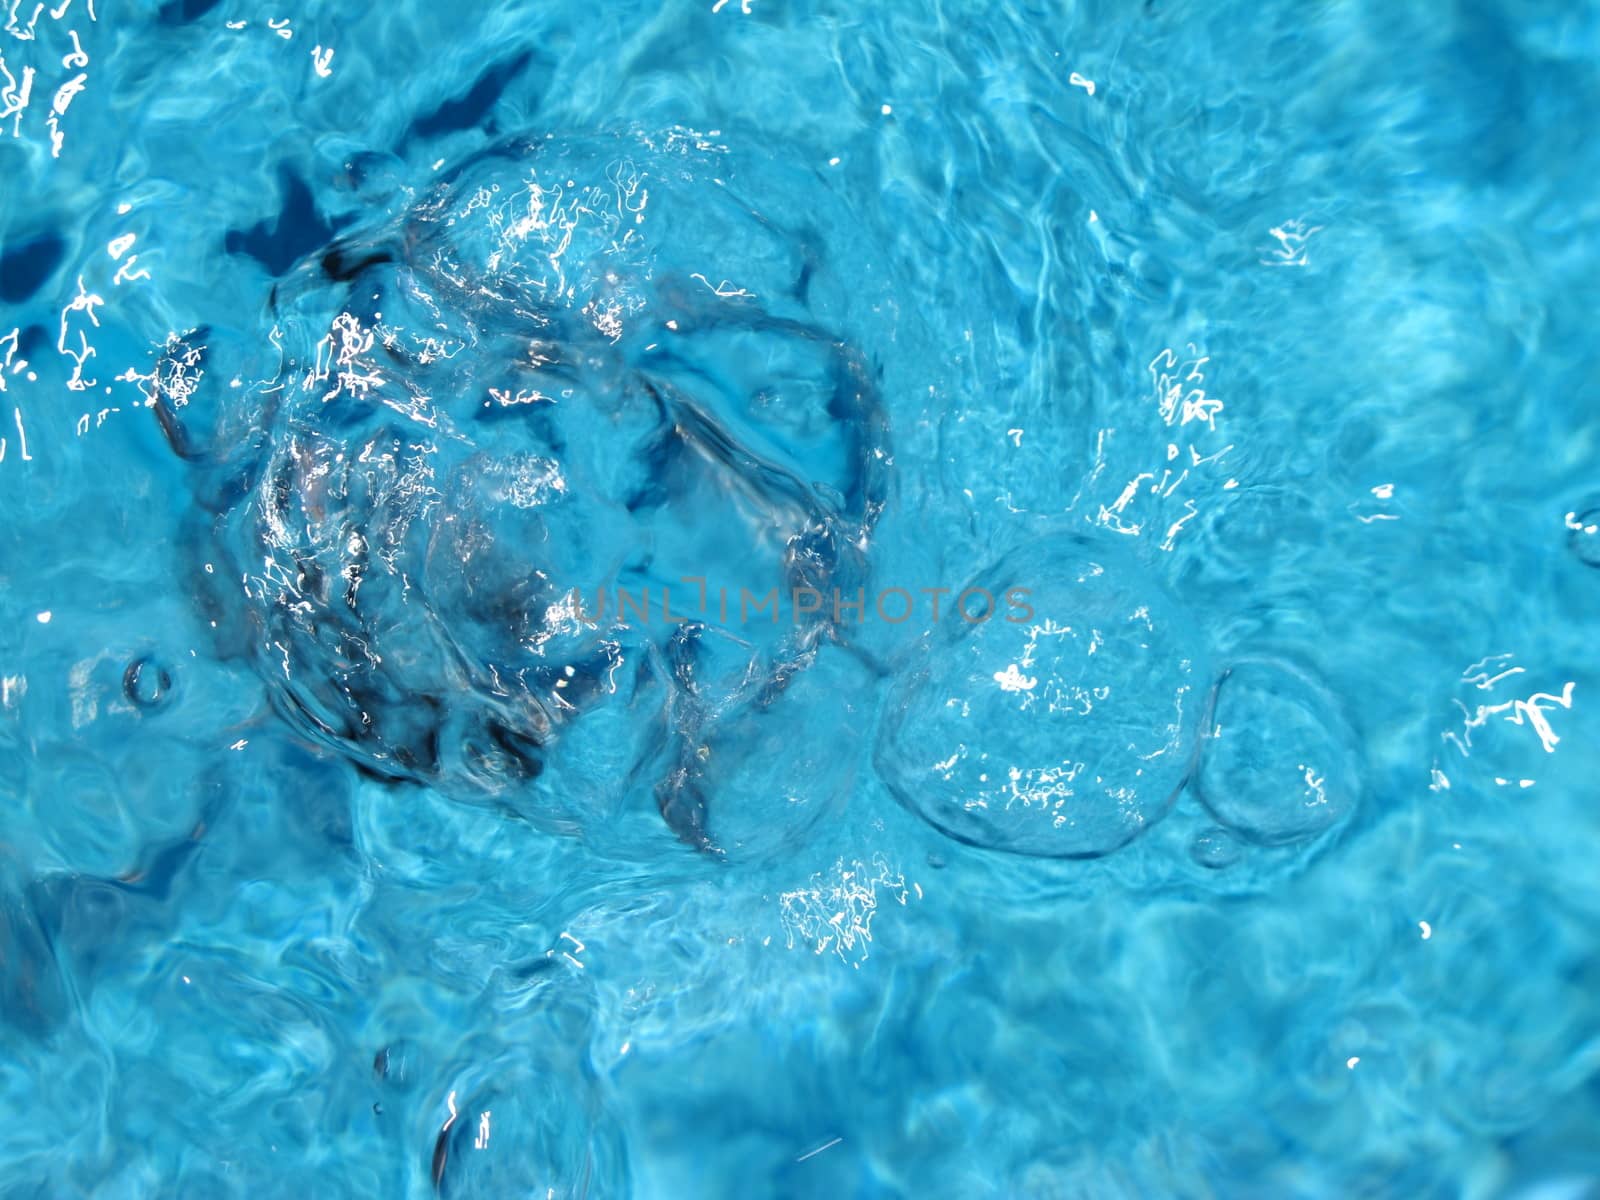 water rippling in a pool by mitzy